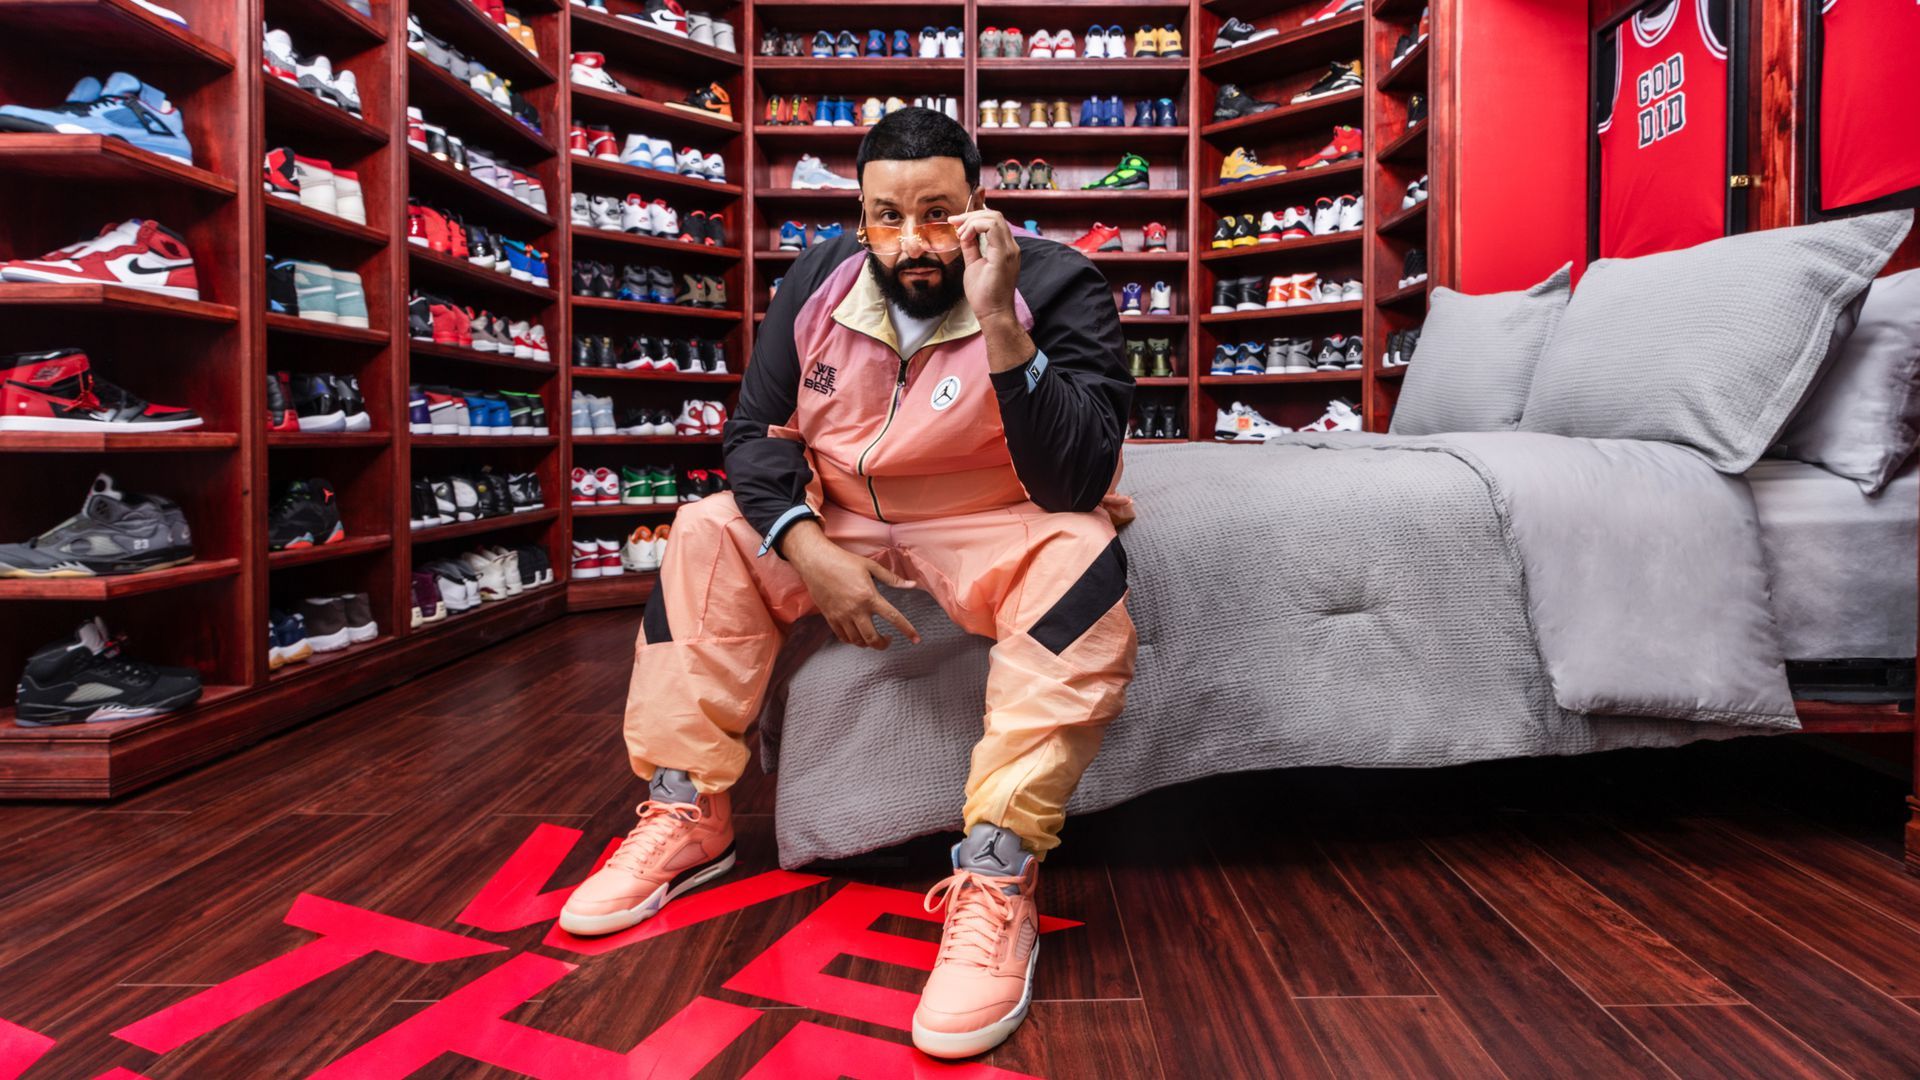 DJ Khaled seated in room filled with shelves of shoes.